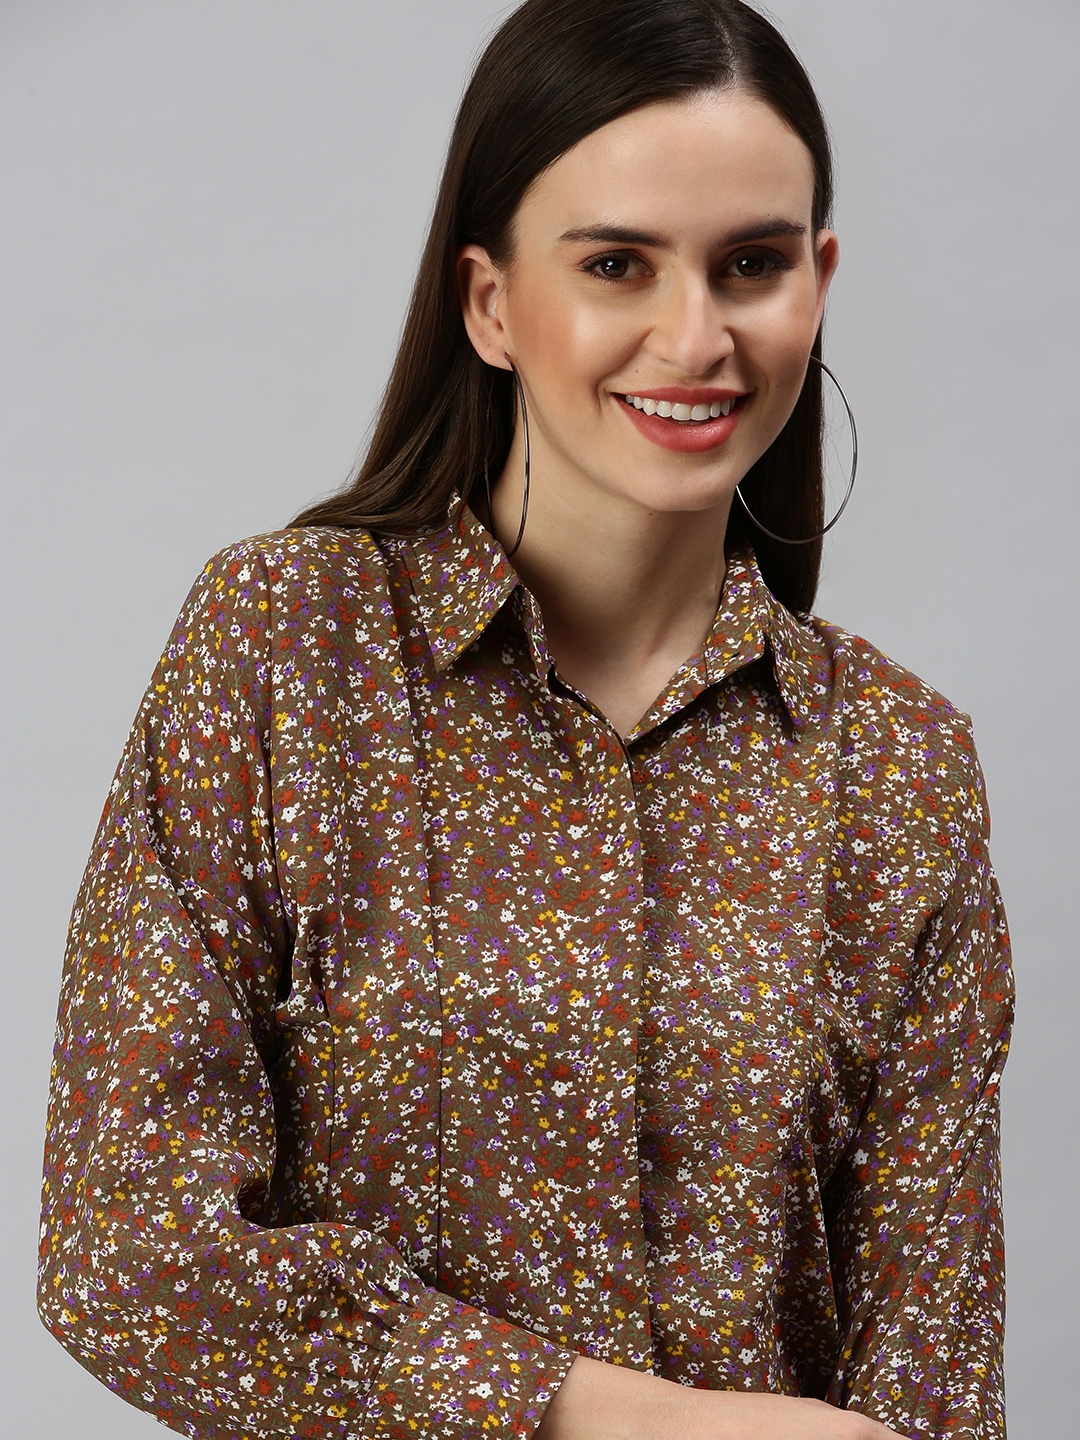 SHOWOFF Women's Slim Fit Roll-Up Sleeves Brown Floral Shirt